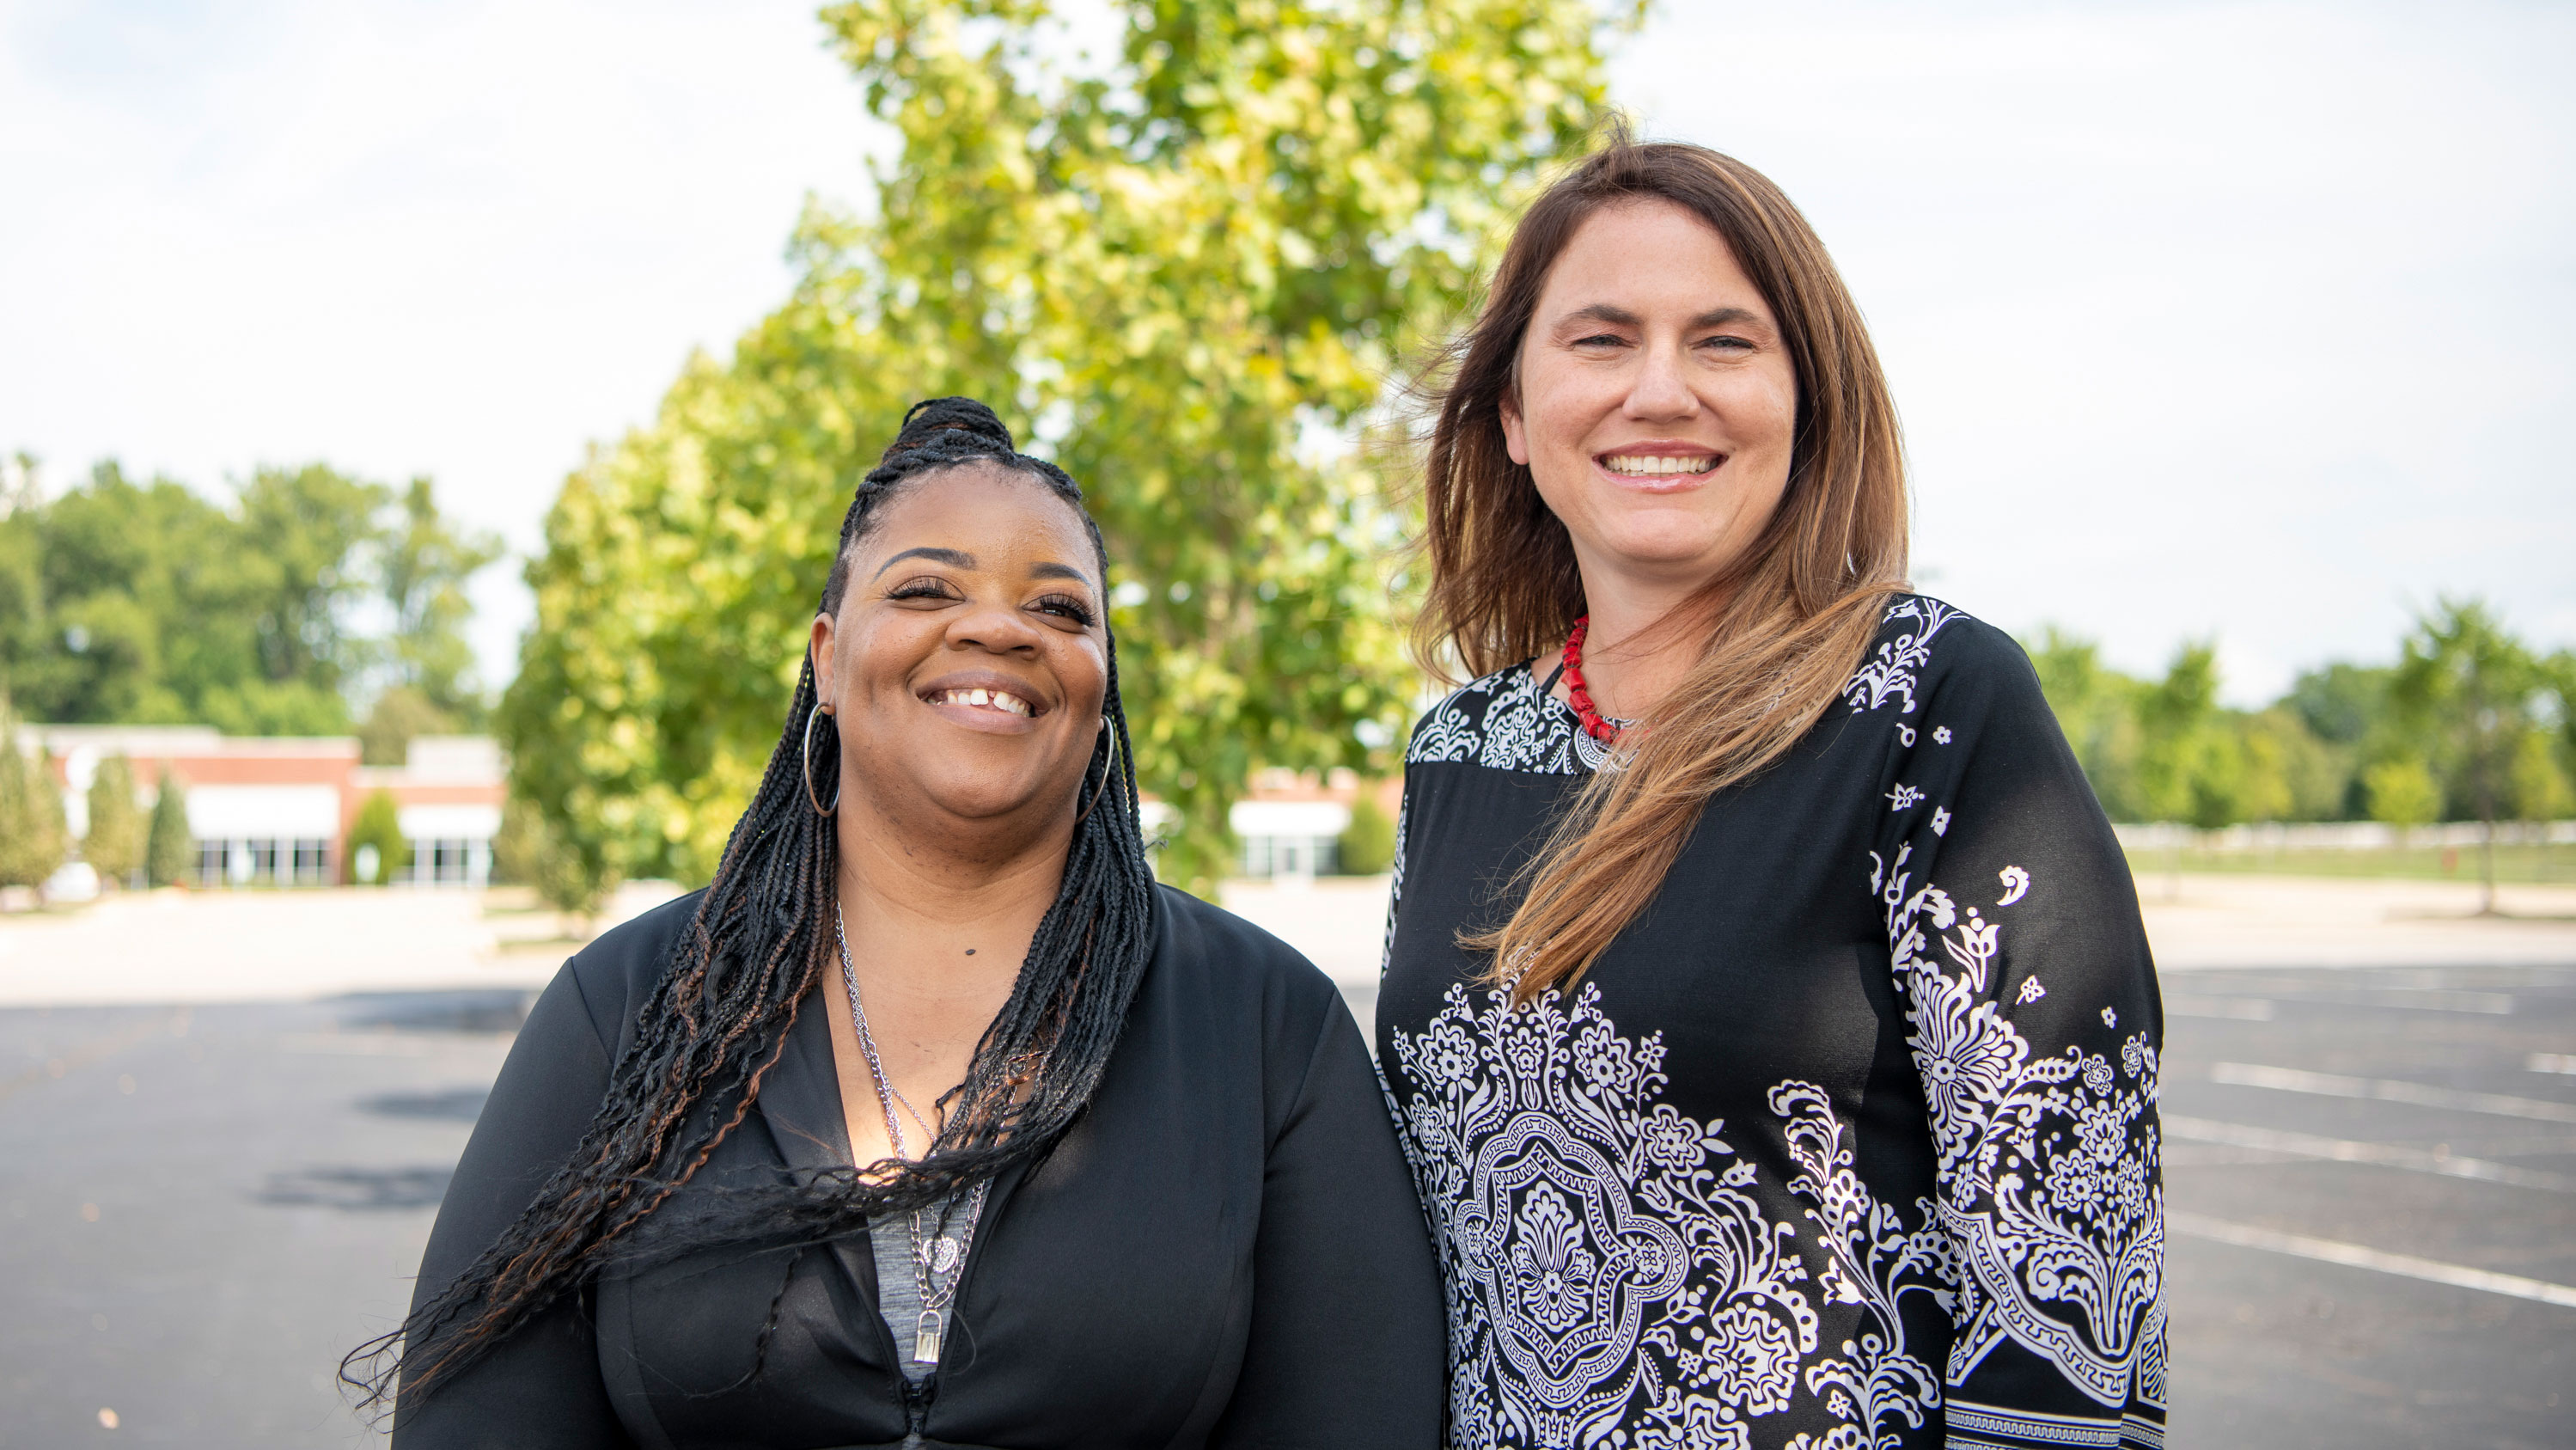 Medicare Case Manager Latisha Crum and Field Case Manager Anne Crutchman standing together outdoors smiling